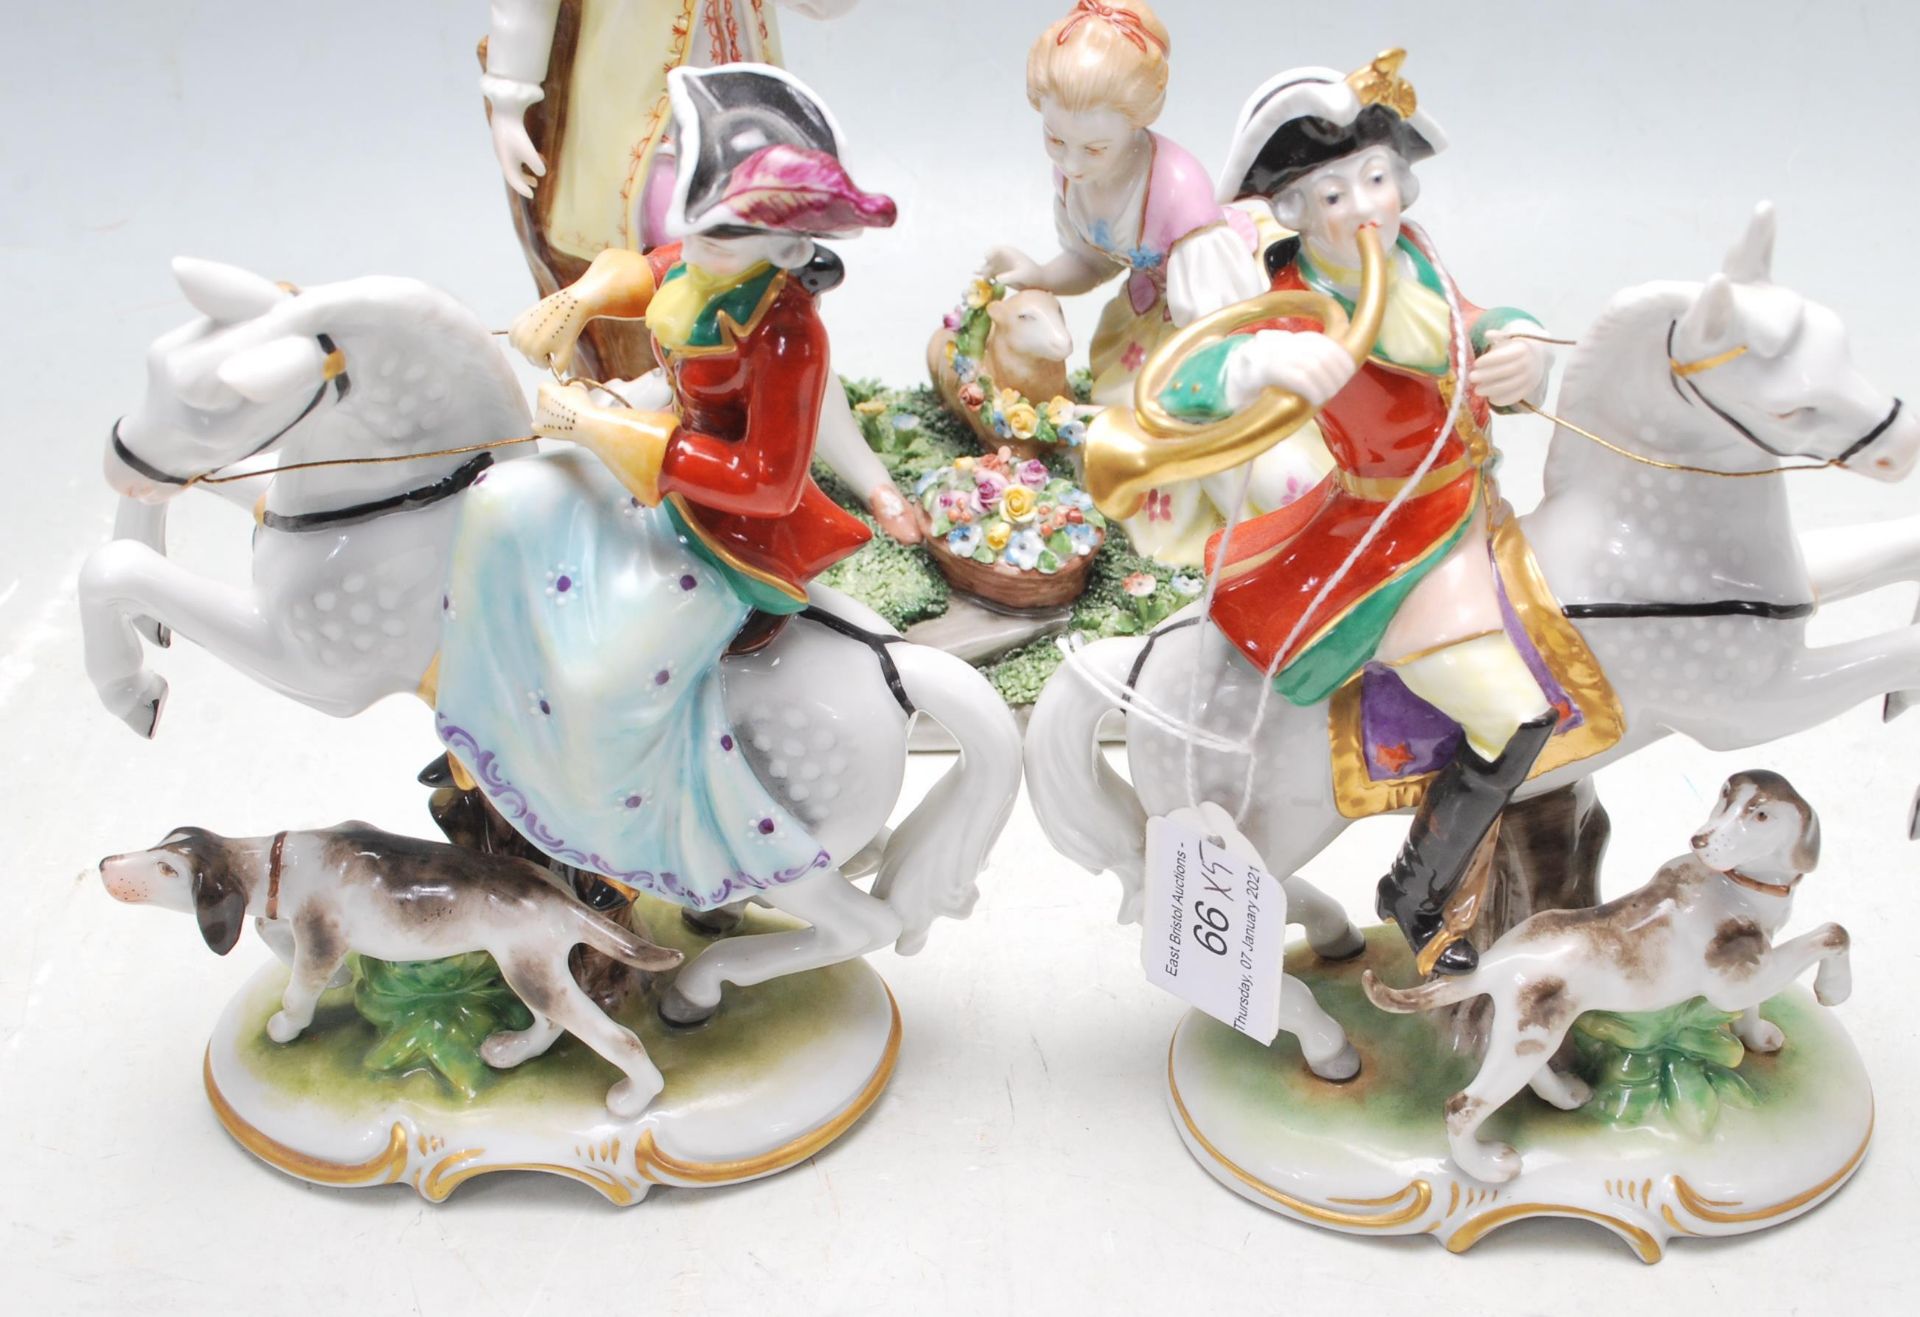 GROUP OF 19TH CENTURY AND LATER DRESDEN STYLE CERAMIC PORCELAIN FIGURINES - Image 3 of 7